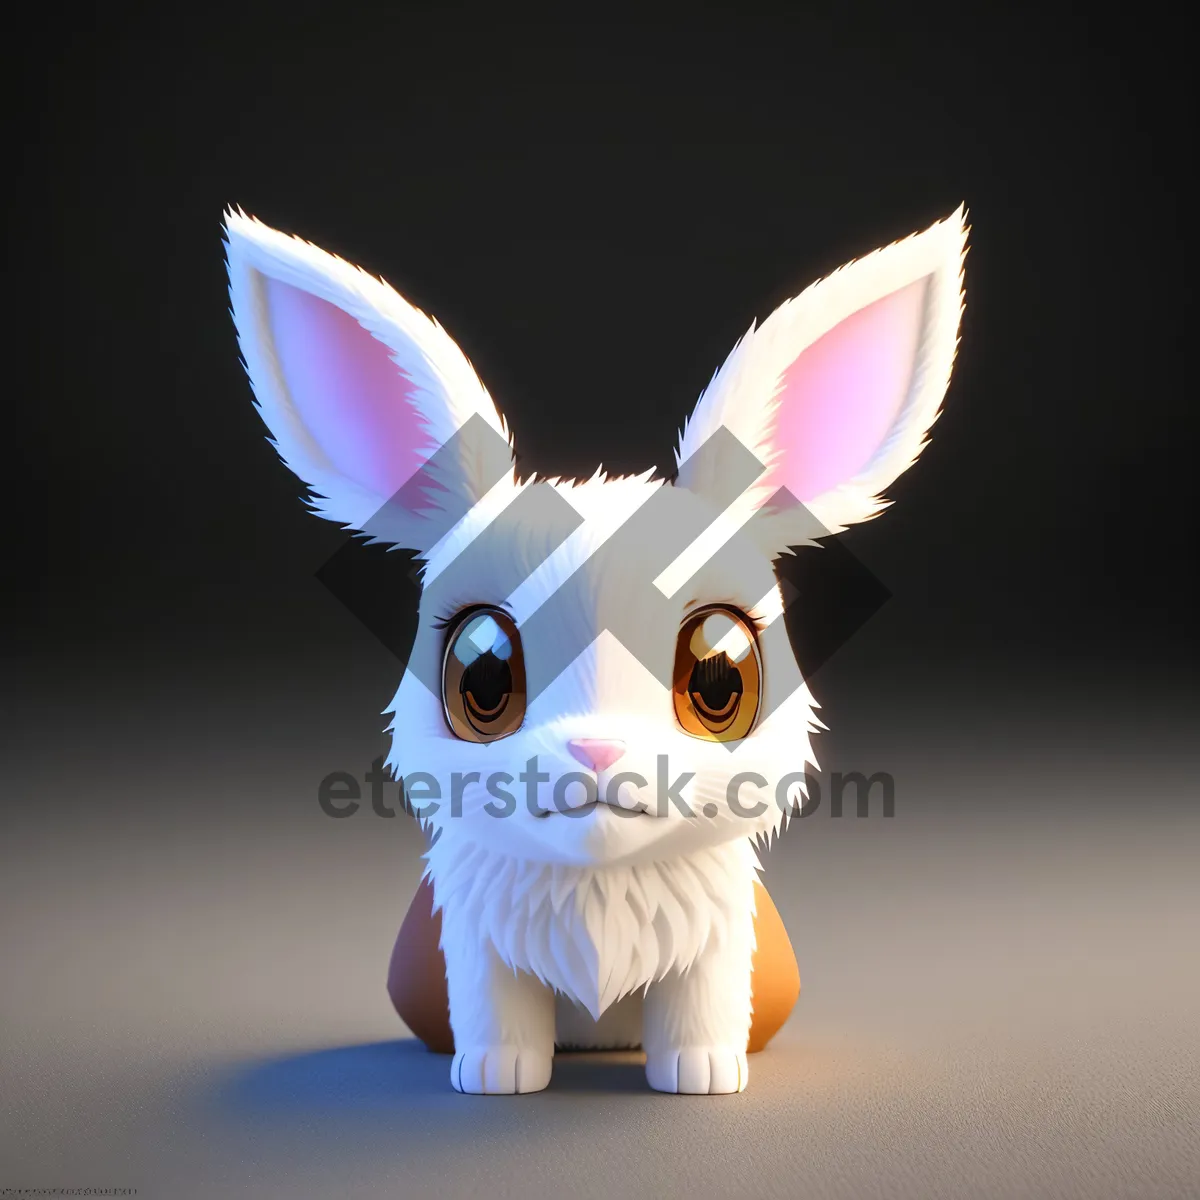 Picture of Fluffy Easter Bunny Toy Image.